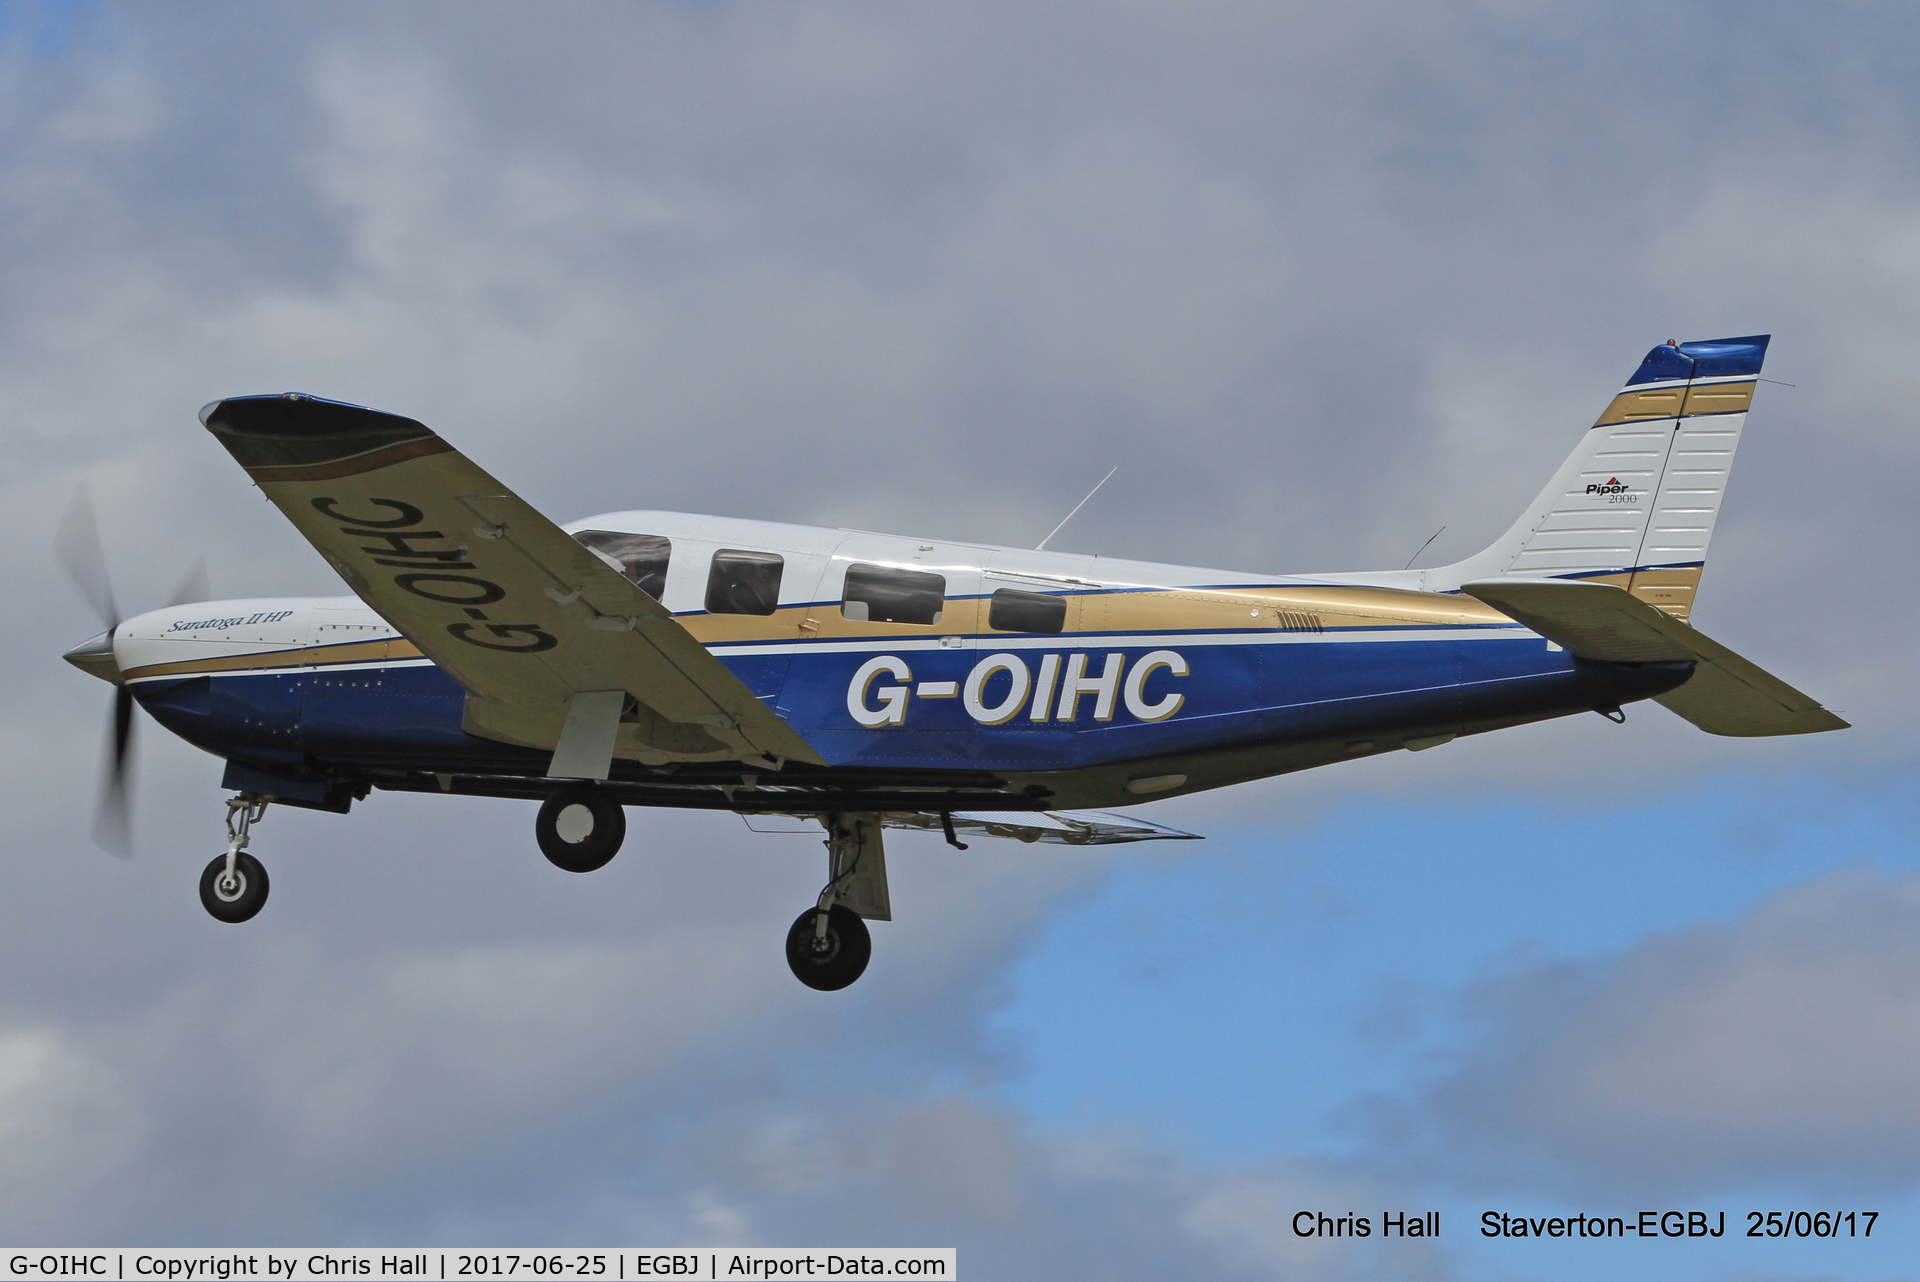 G-OIHC, 2000 Piper PA-32R-301 Saratoga II HP C/N 32-46163, Project Propeller at Staverton